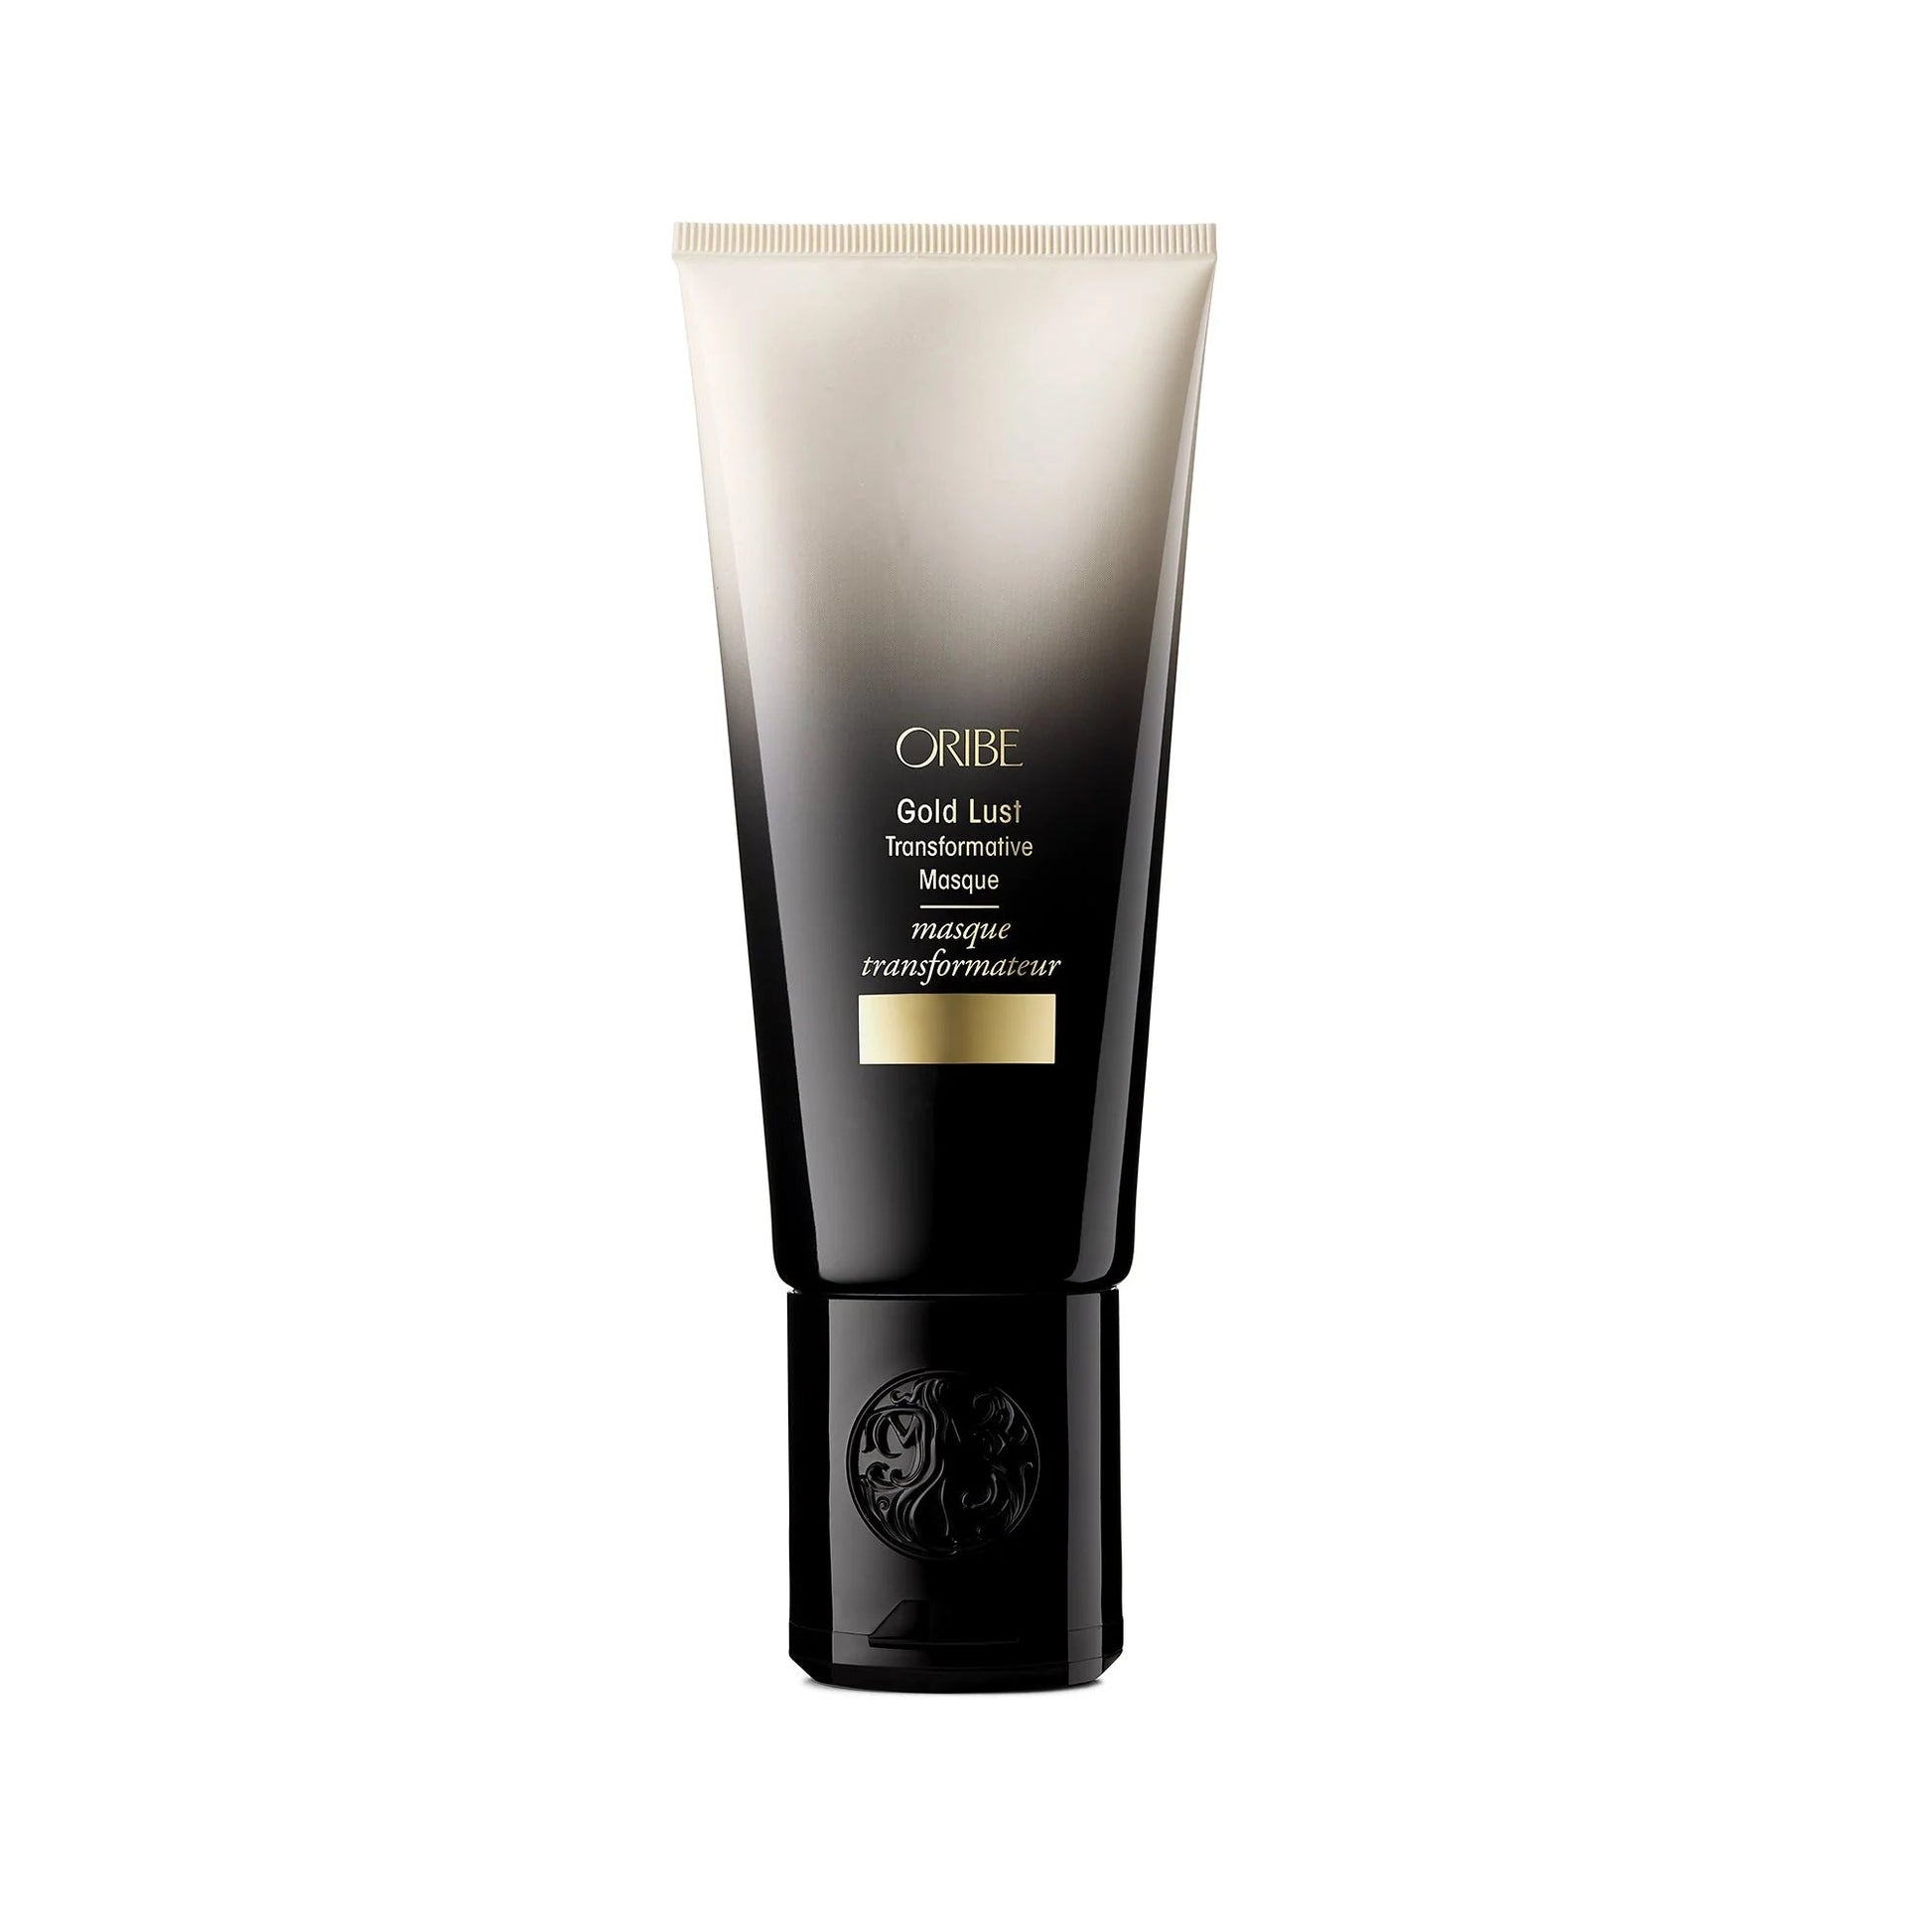 Oribe Gold Lust Transformative Masque - shelley and co